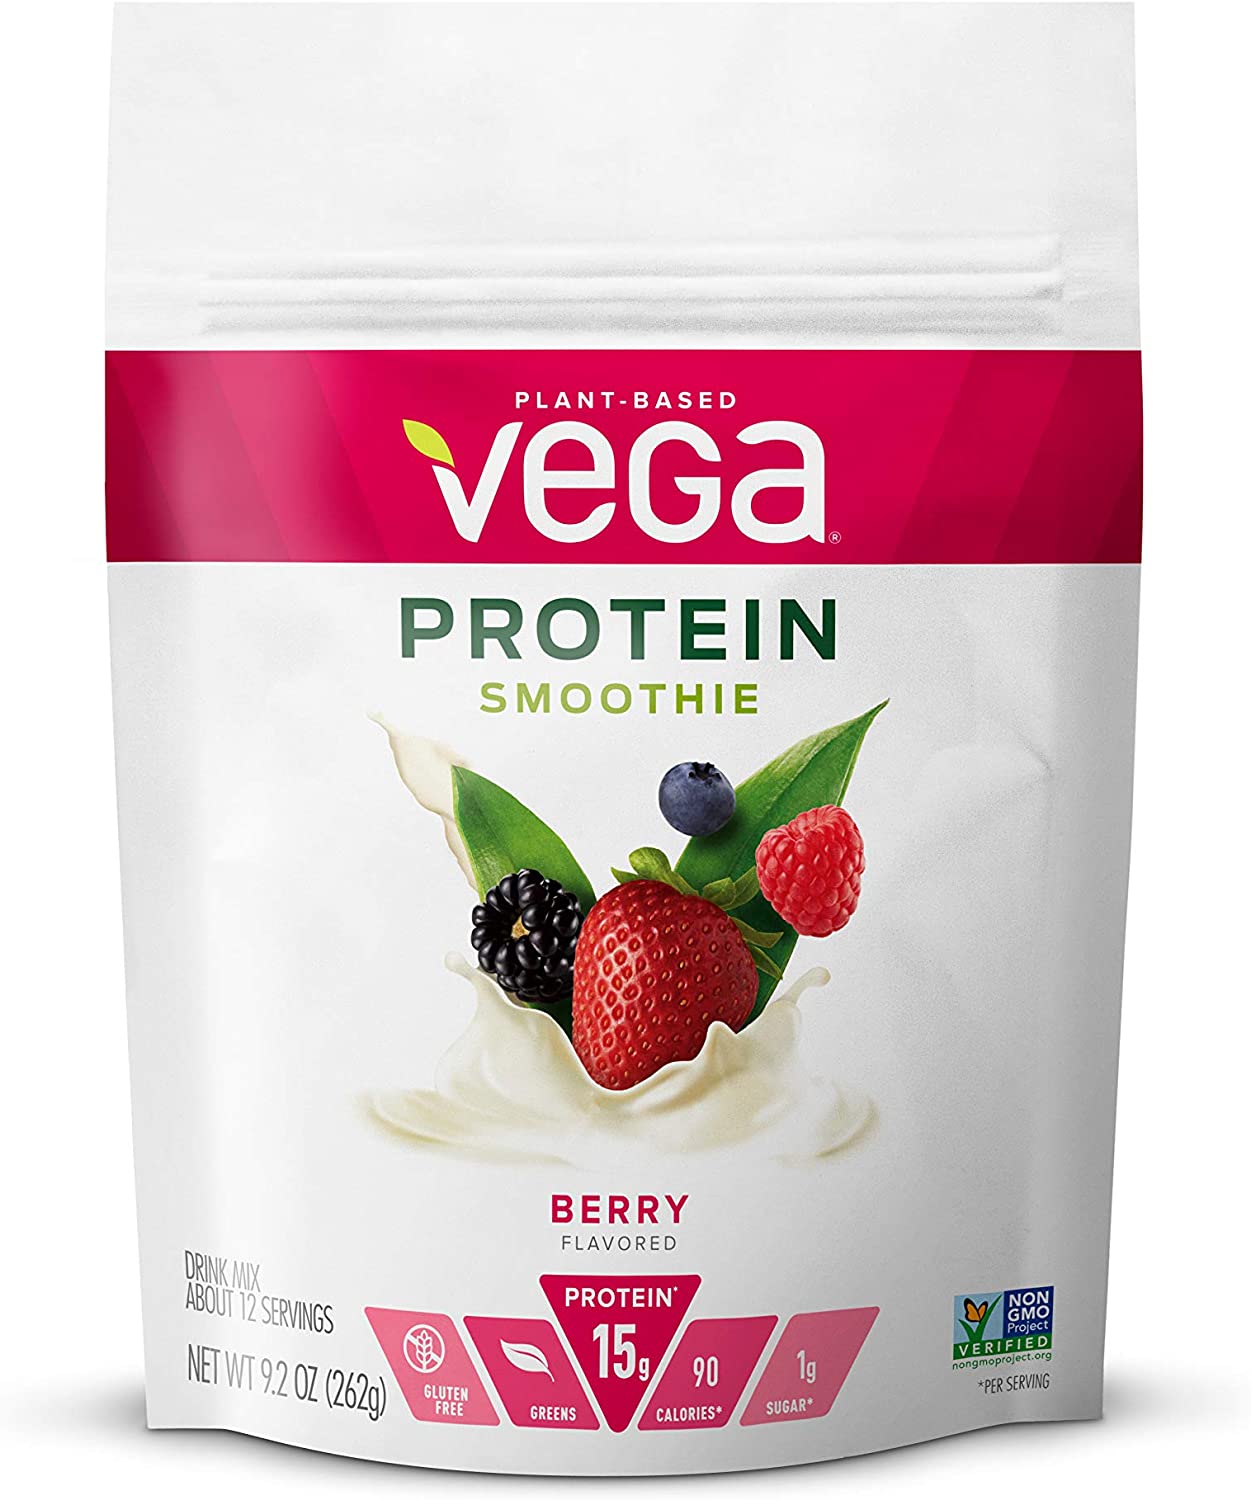 Vega Protein Smoothie, Berry, 12 Servings, 9.2 oz Pouch, Plant